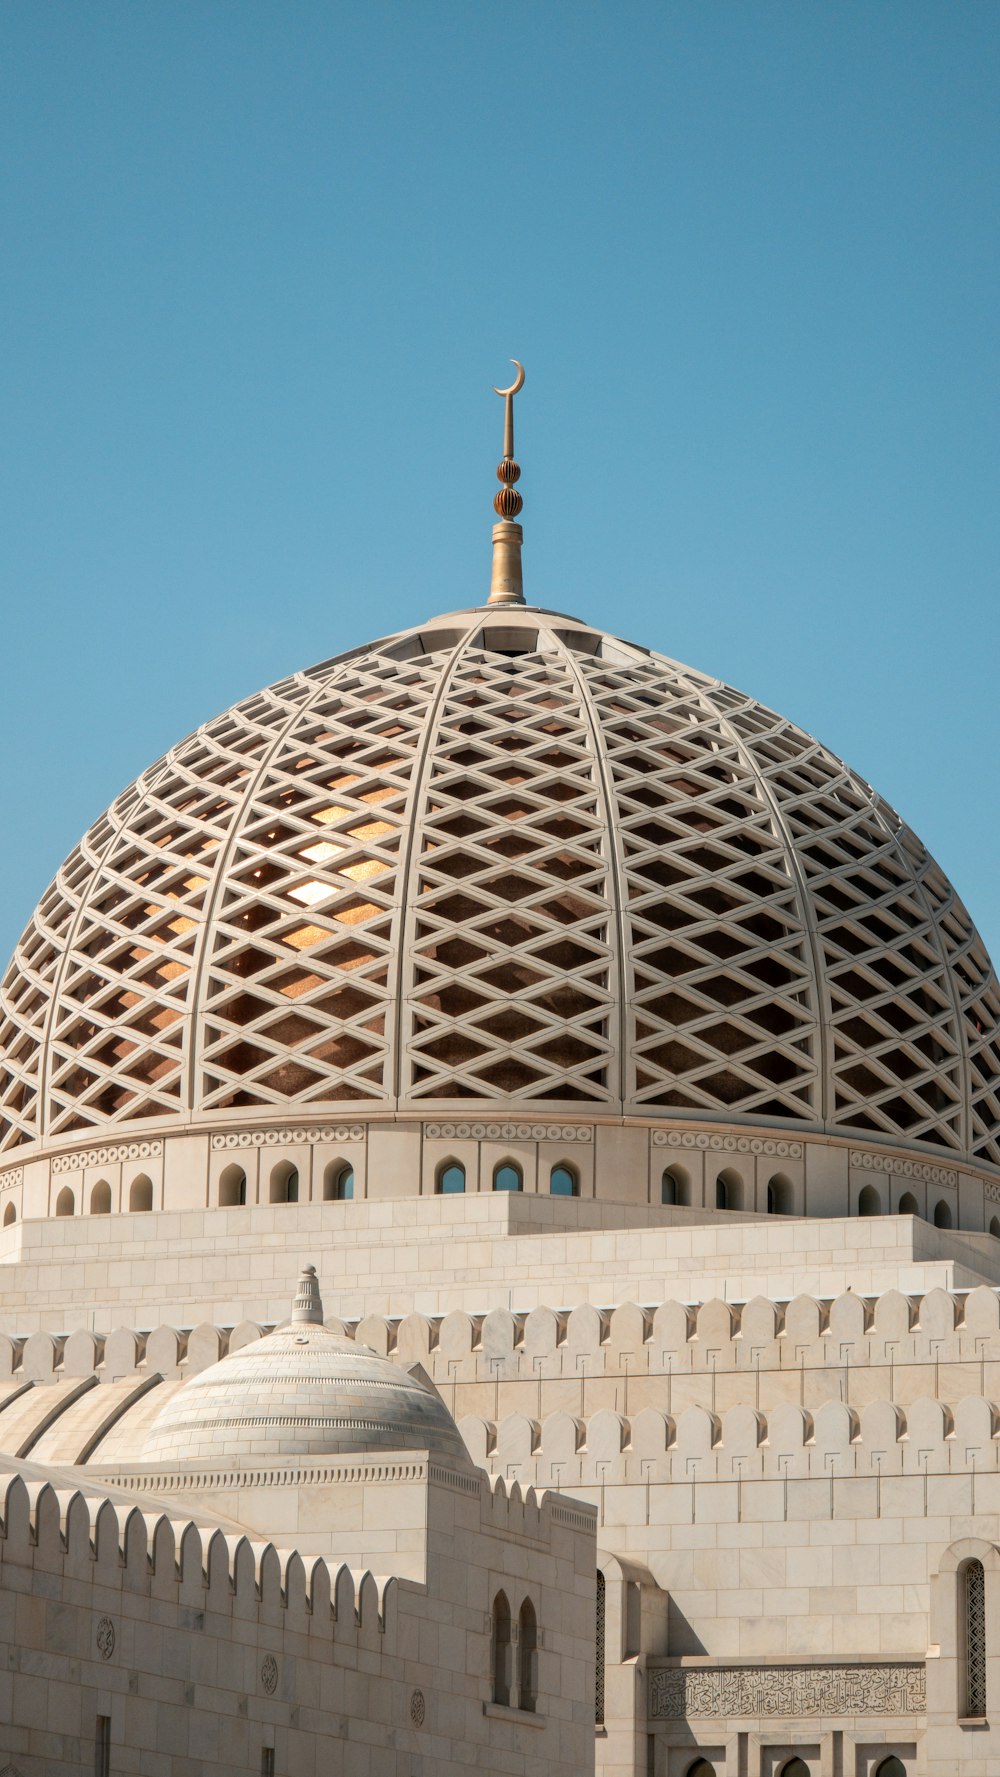 the dome of a building with a cross on top